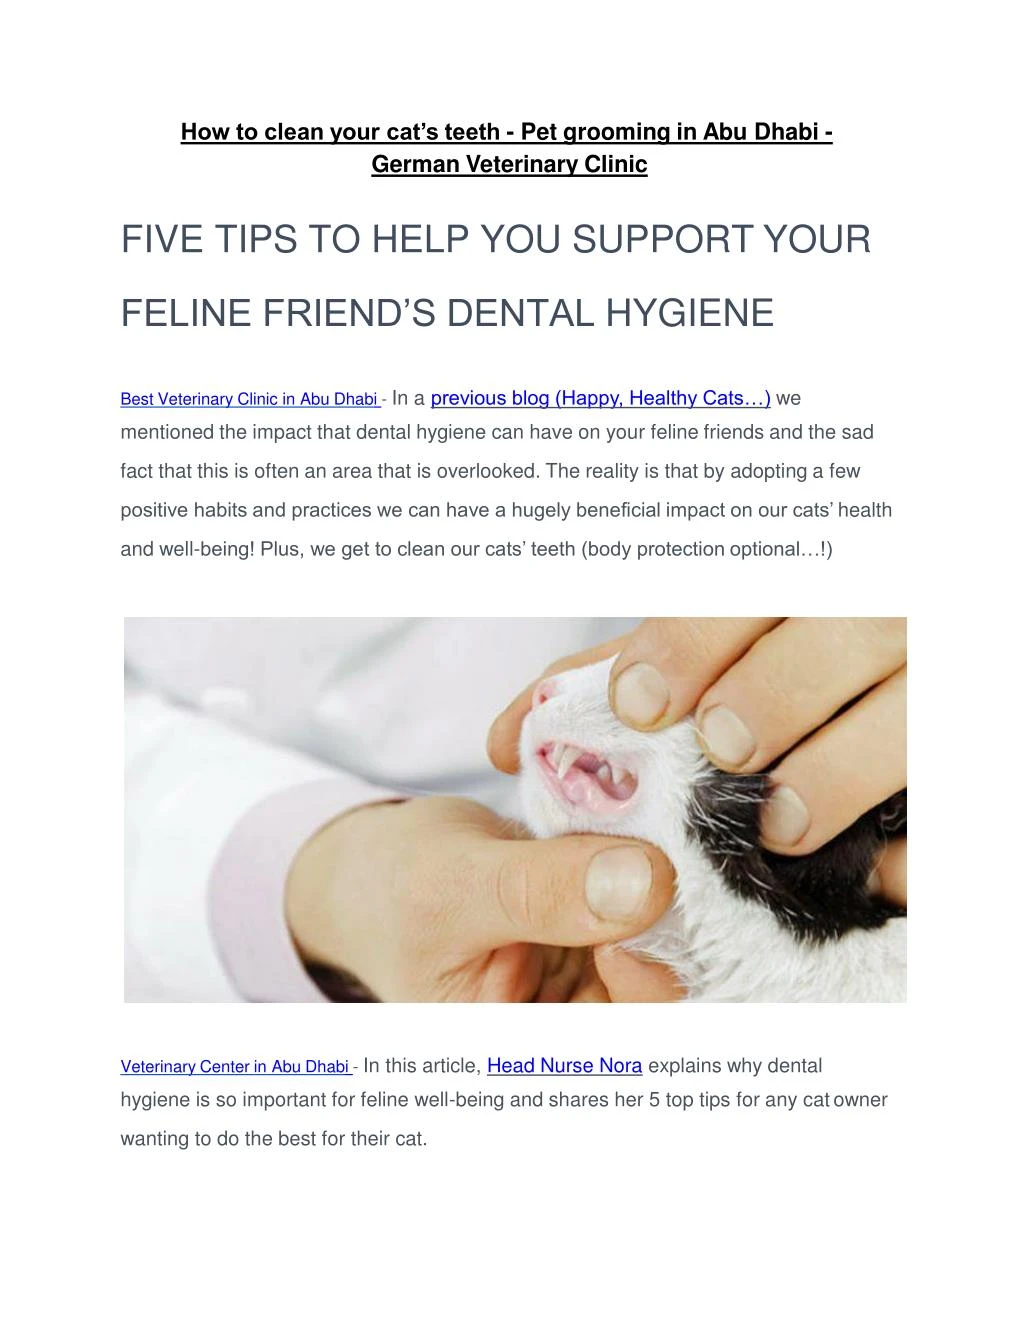 five tips to help you support your feline friend s dental hygiene